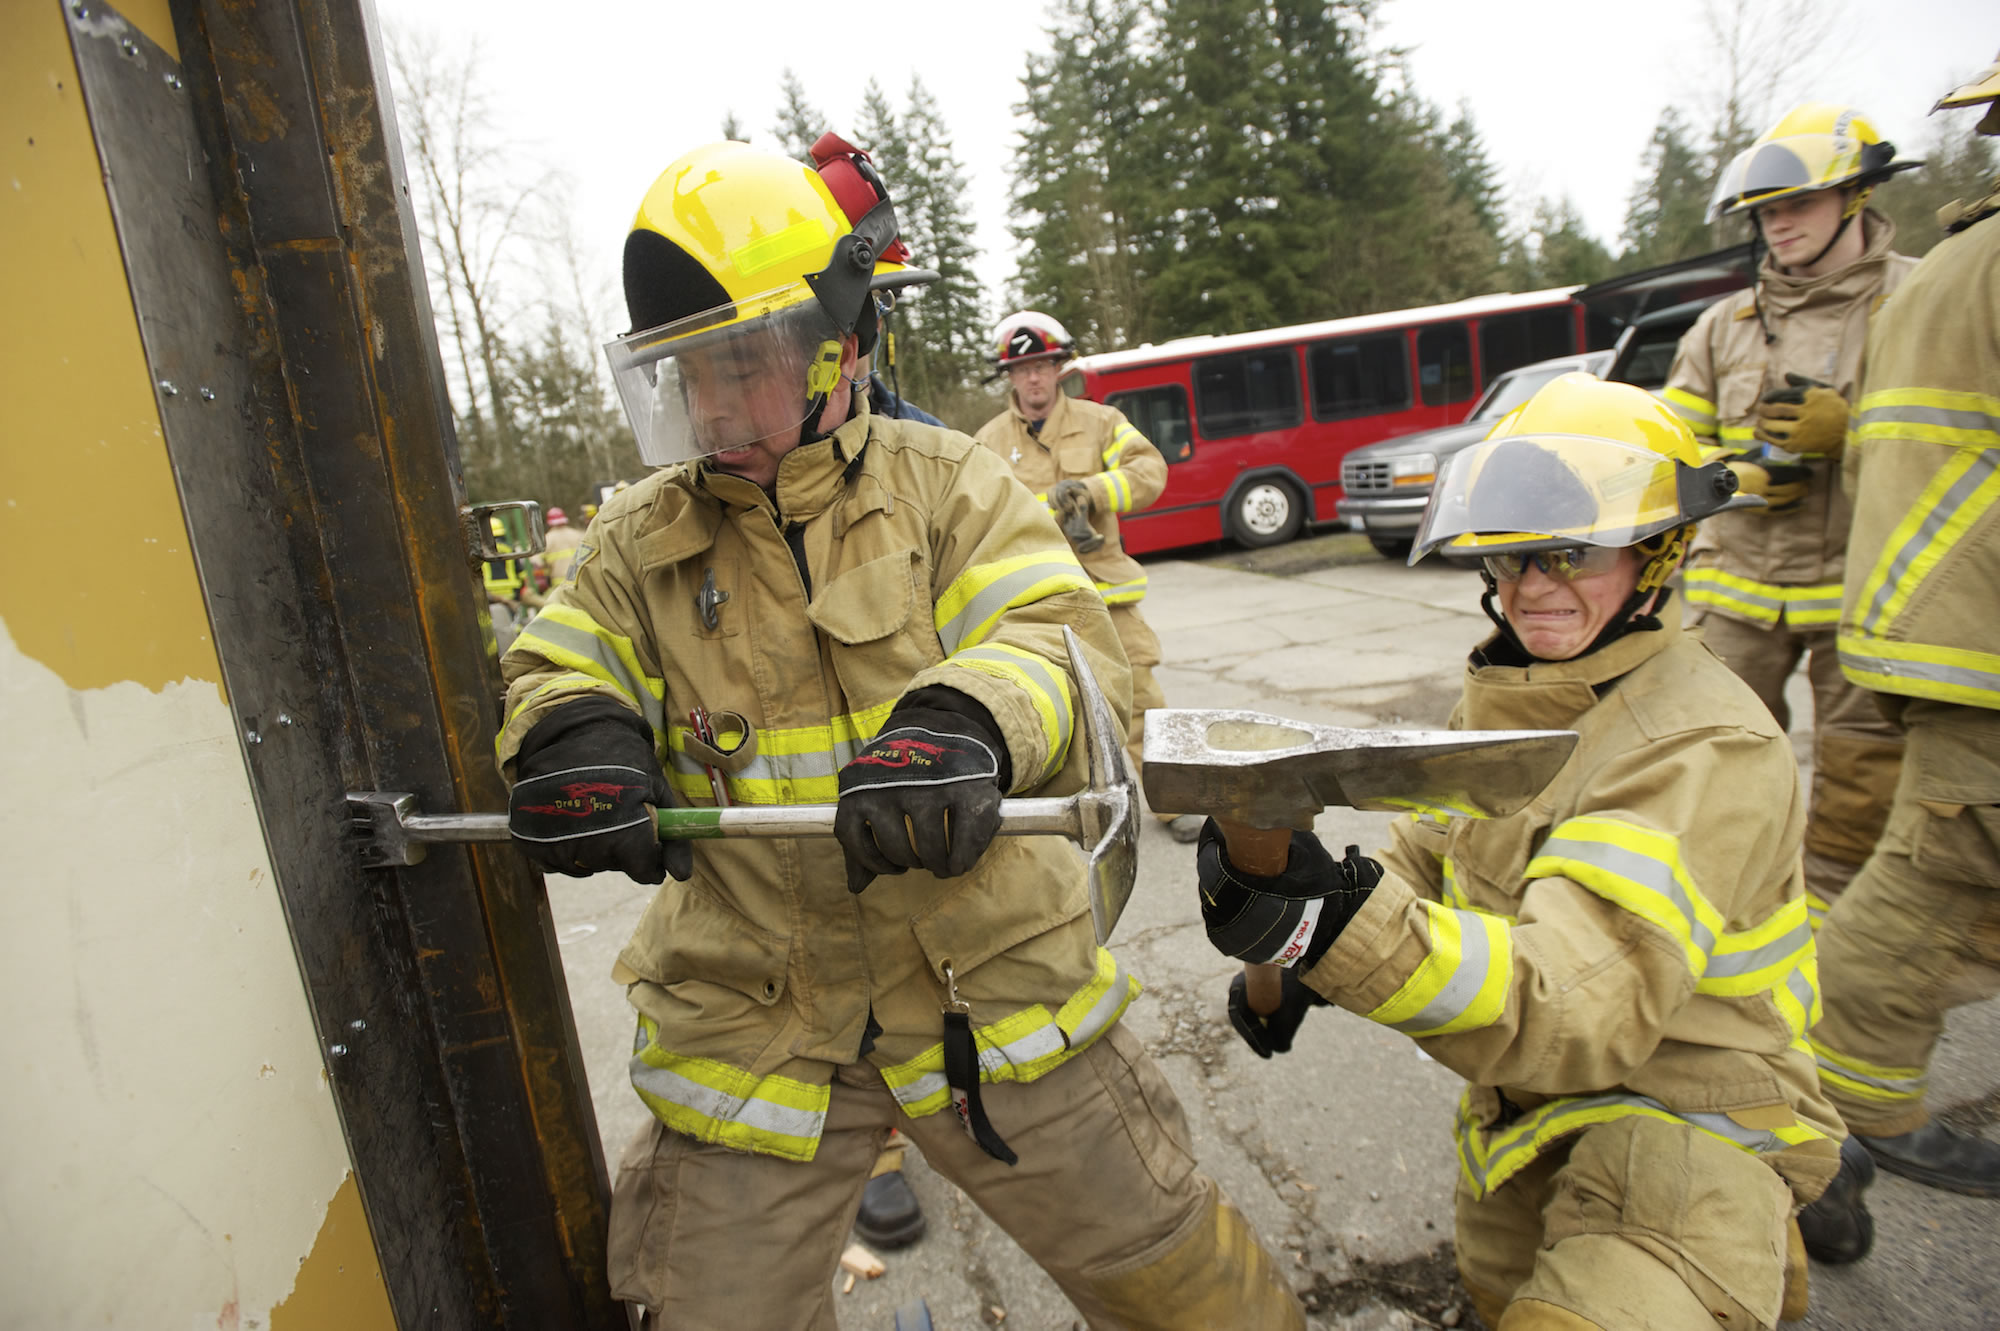 Clark County Fire and Rescue firefighters Zach Johnson, left, and Pavel Zabolotskiy use a Halligan tool to force entry through a door during a training exercise Thursday.